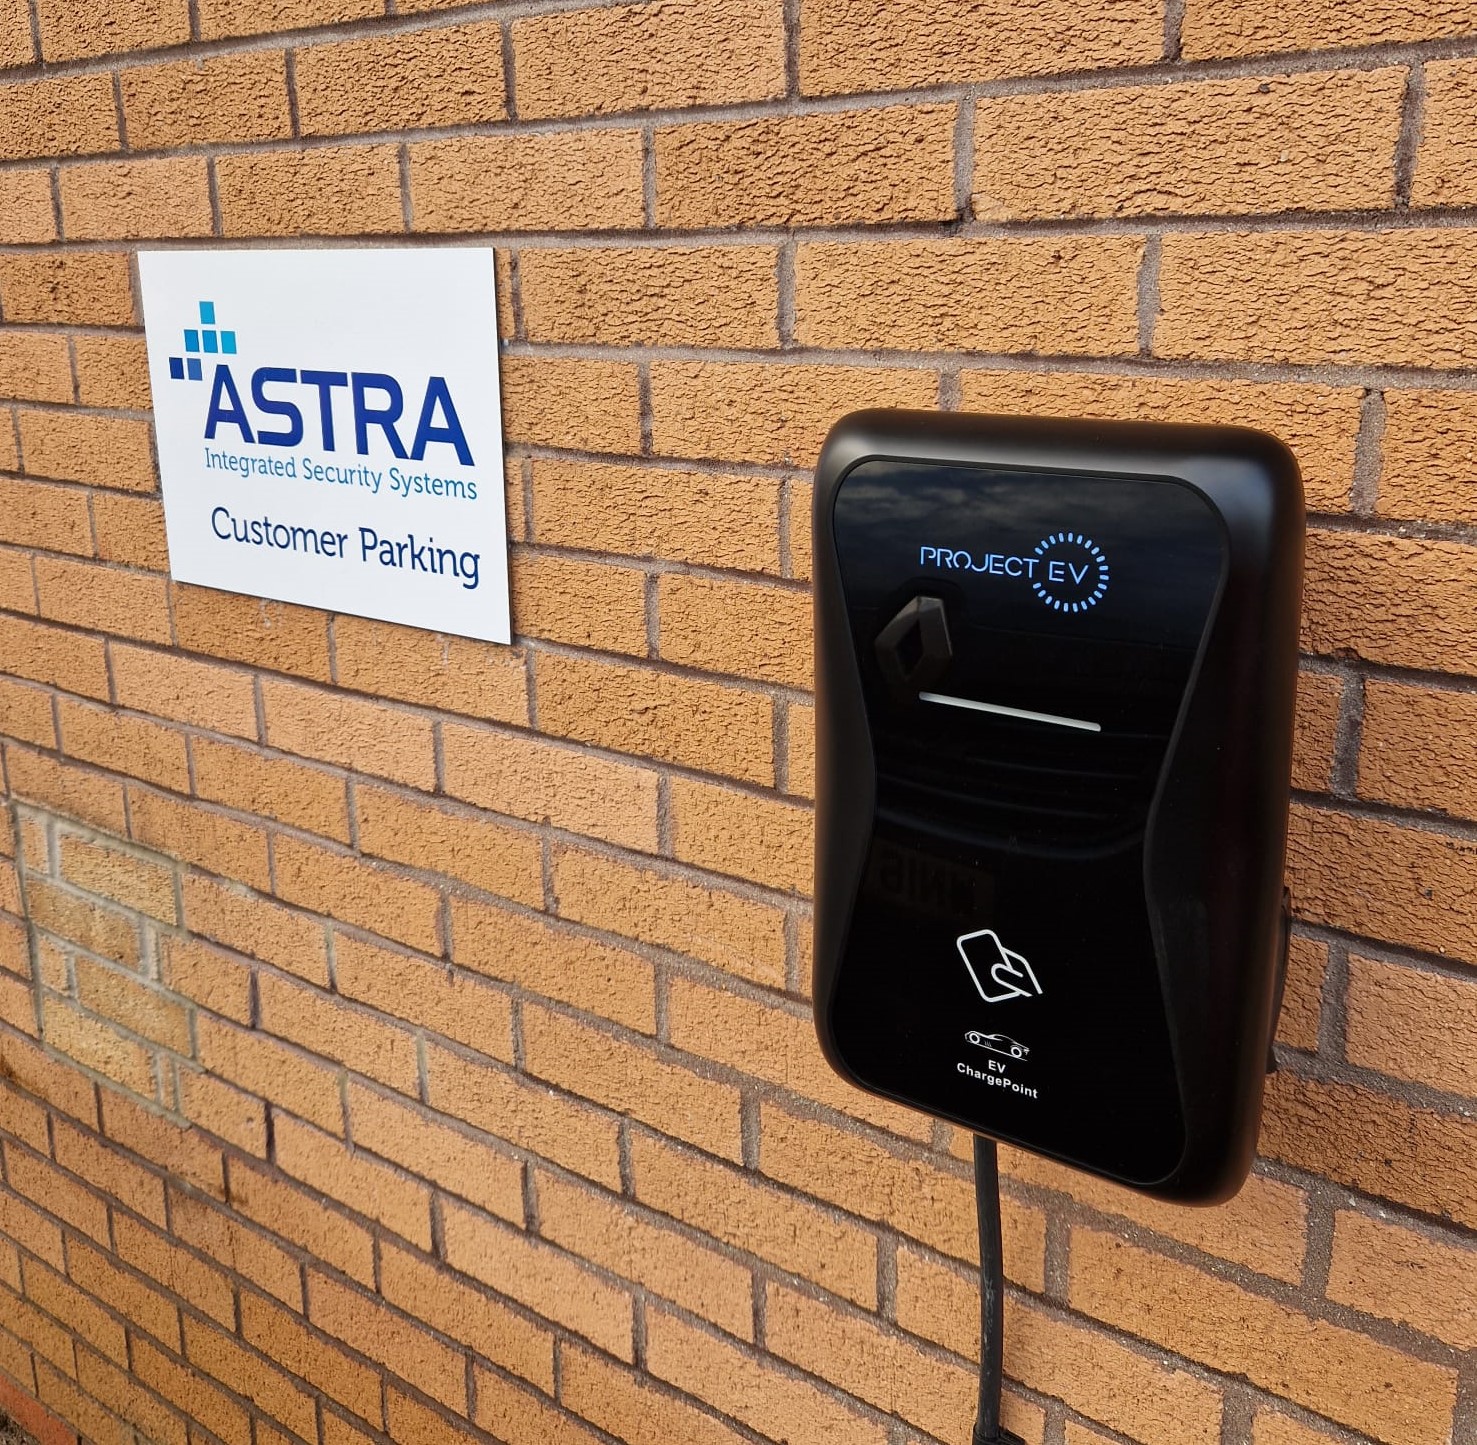 Our latest work place EV installation